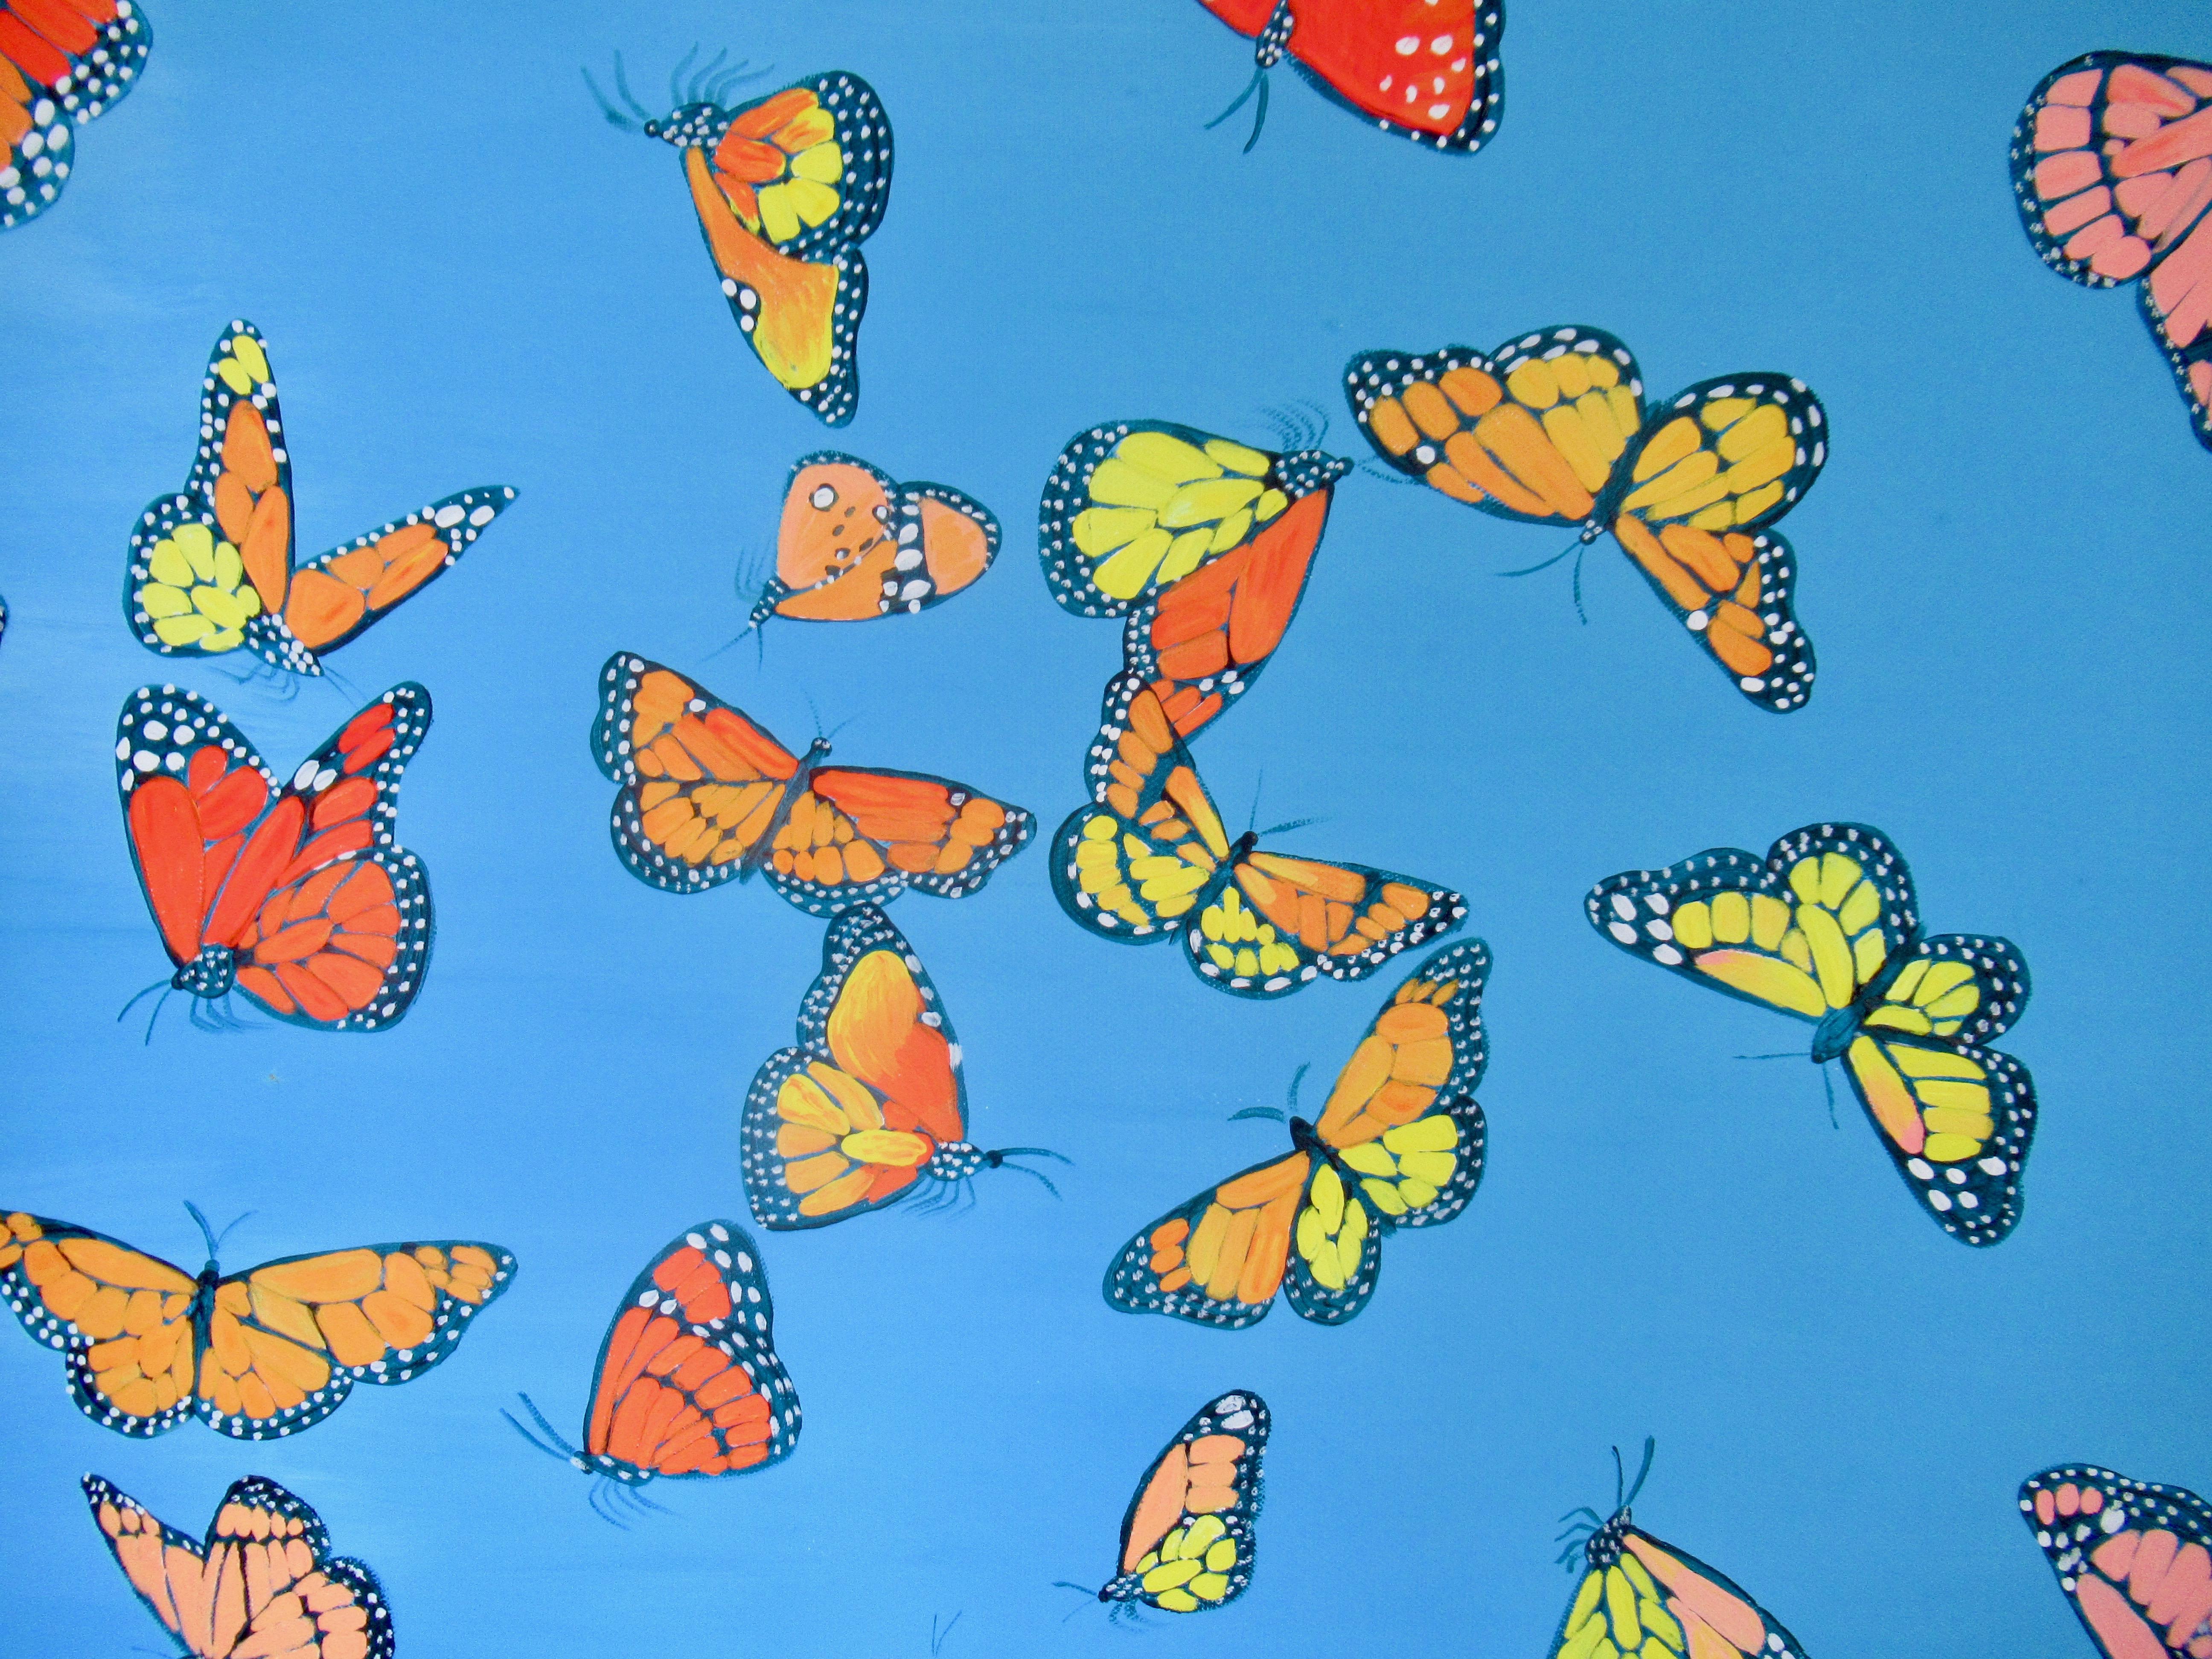 <p>Artist Comments<br />Monarch butterflies in pink, yellow, orange, and red fly around on a serene background of blue. Their wings fluttering in every direction. Part of a mini-series by artist Natasha Tayles.</p><br /><p>About the Artist<br